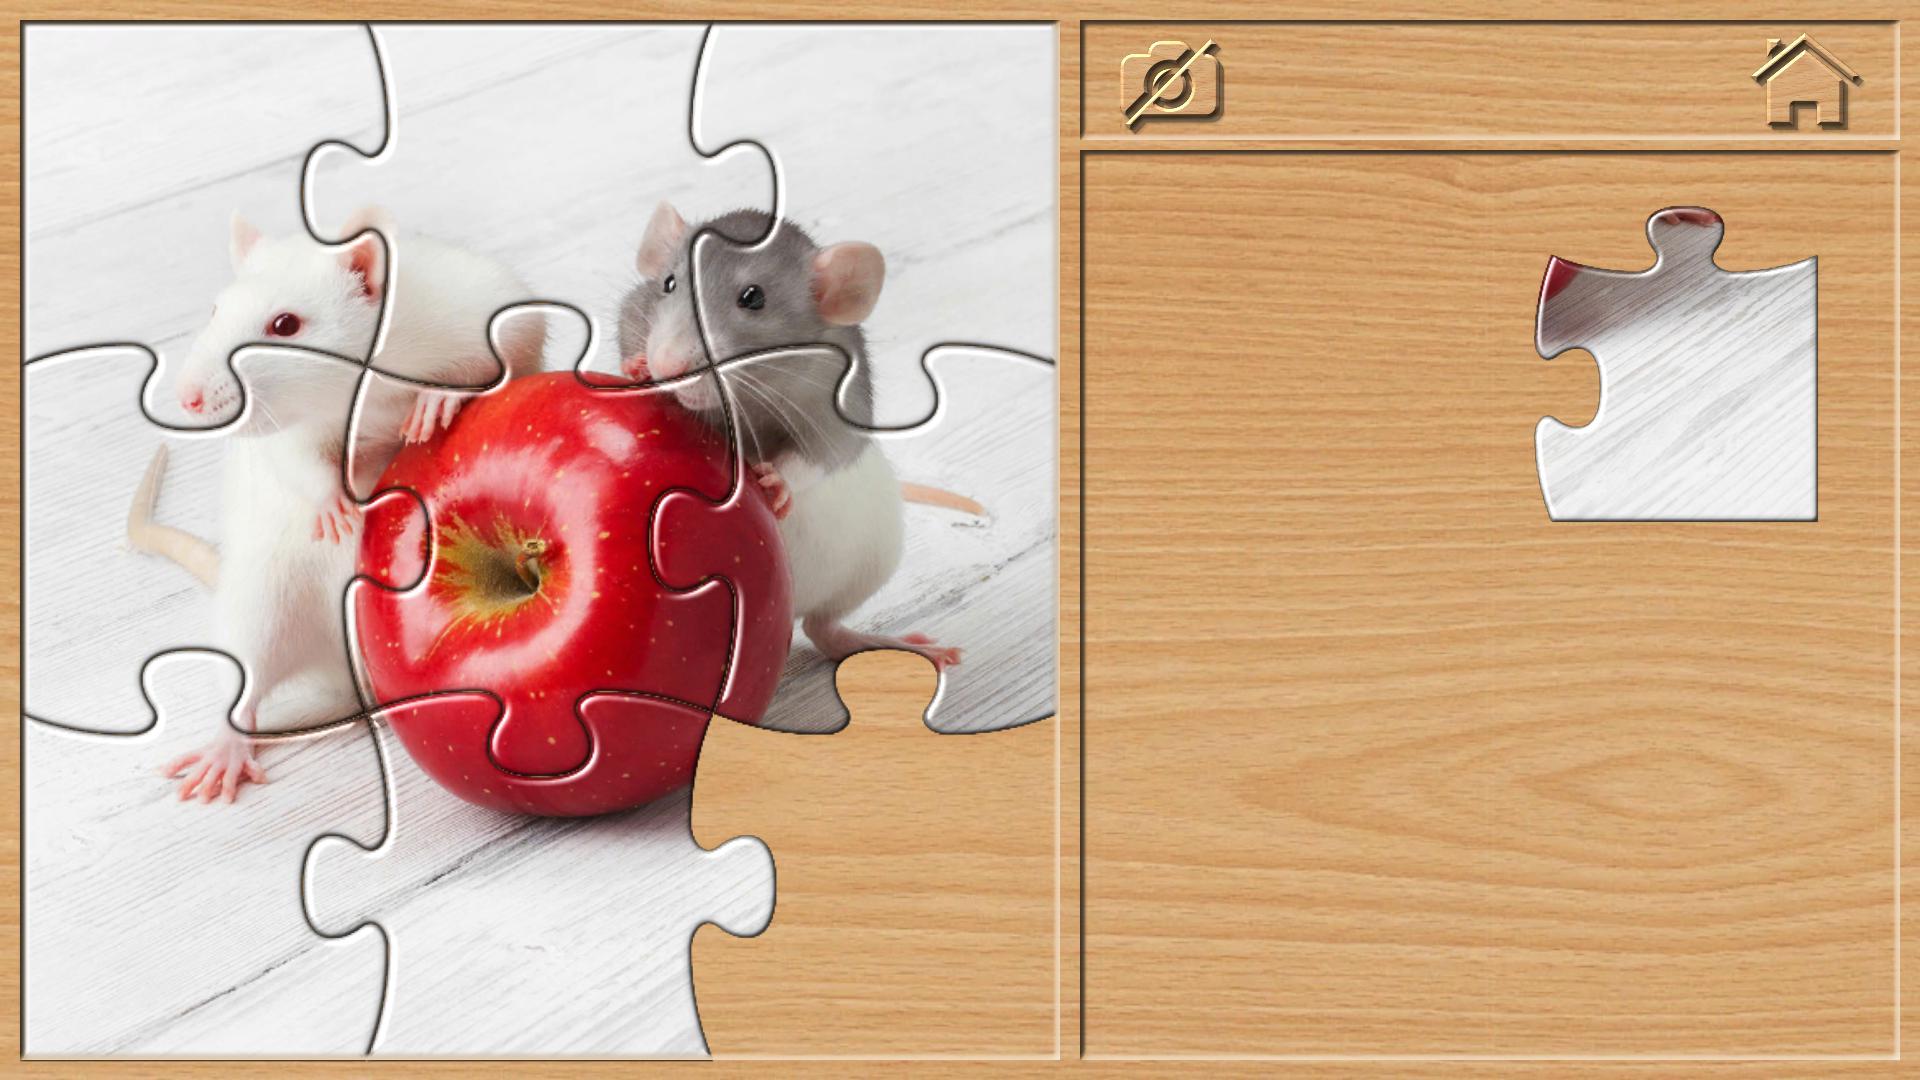 Animal Sounds - Jigsaw Puzzles for Kids._截图_5